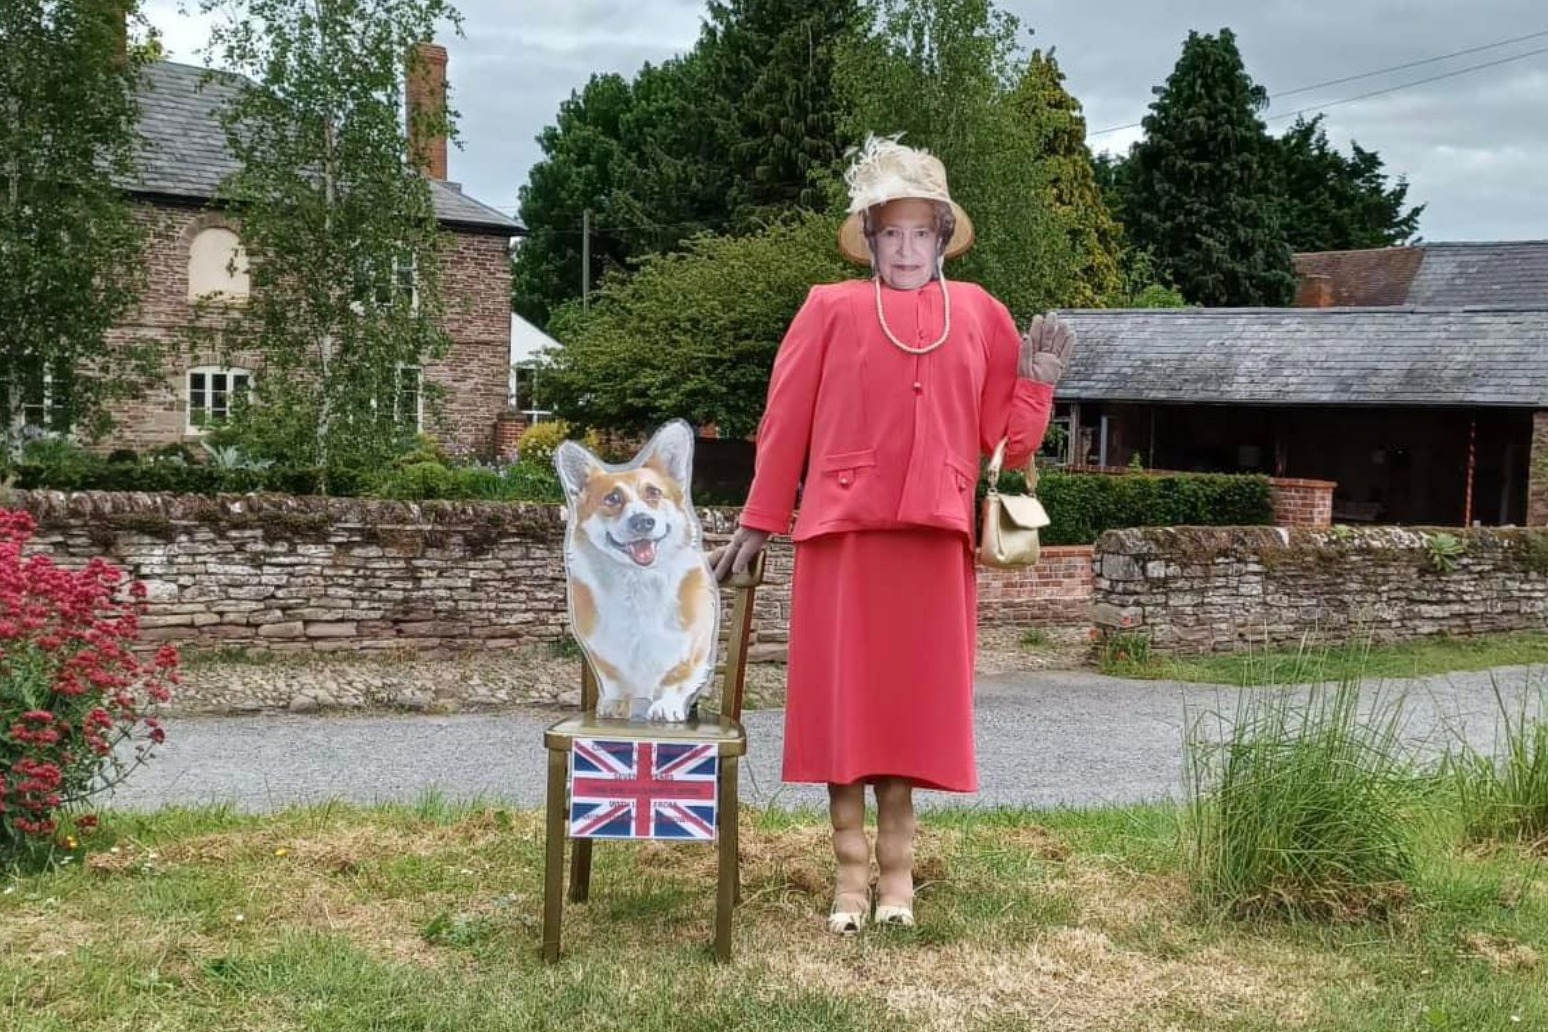 Village celebrates jubilee with 104 royal-related scarecrows 